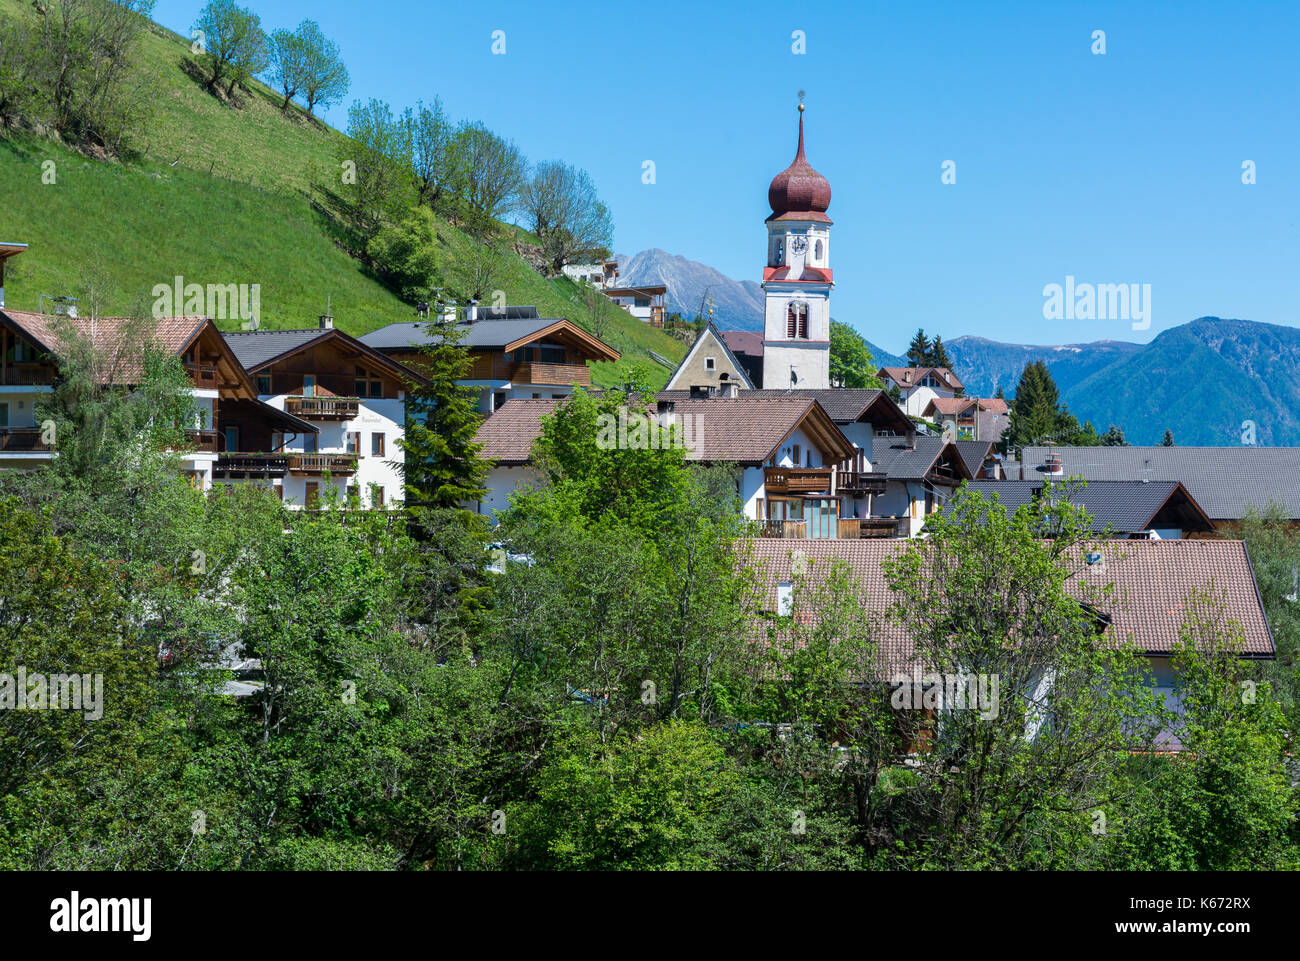 Church of the village in South Tyrol, Telves Racines, Trentino Alto Adige, northern Italy Stock Photo